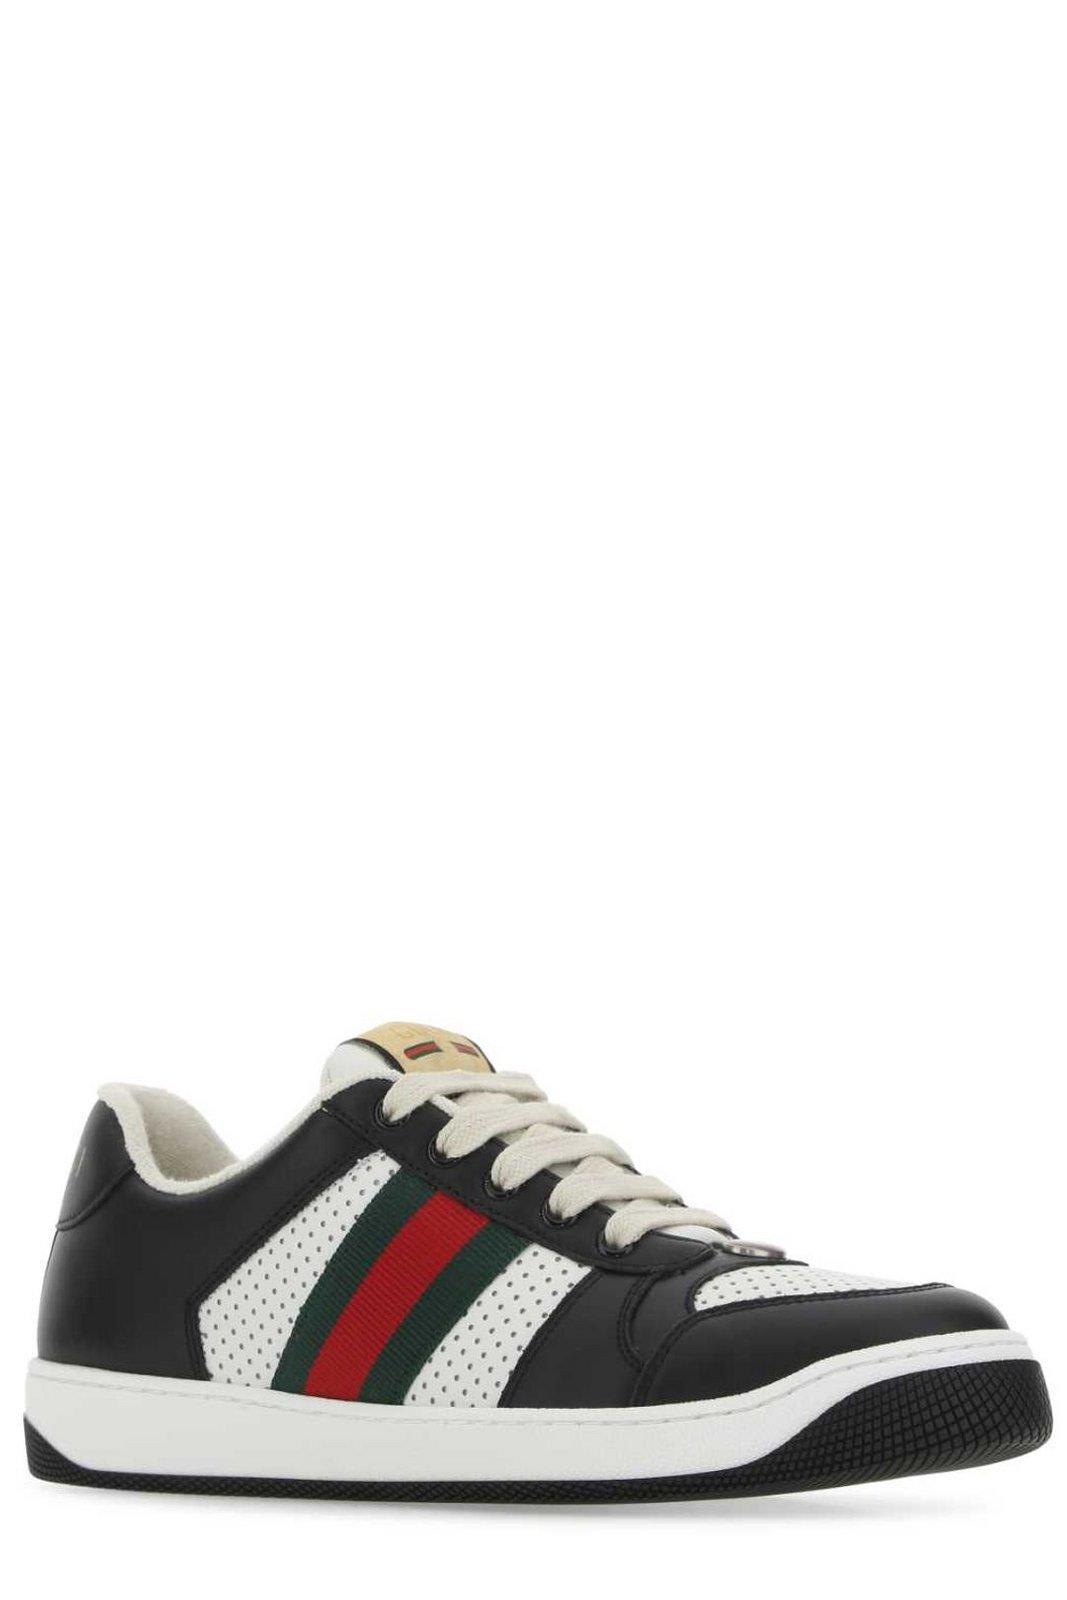 Shop Gucci Screener Laced Low-top Sneakers